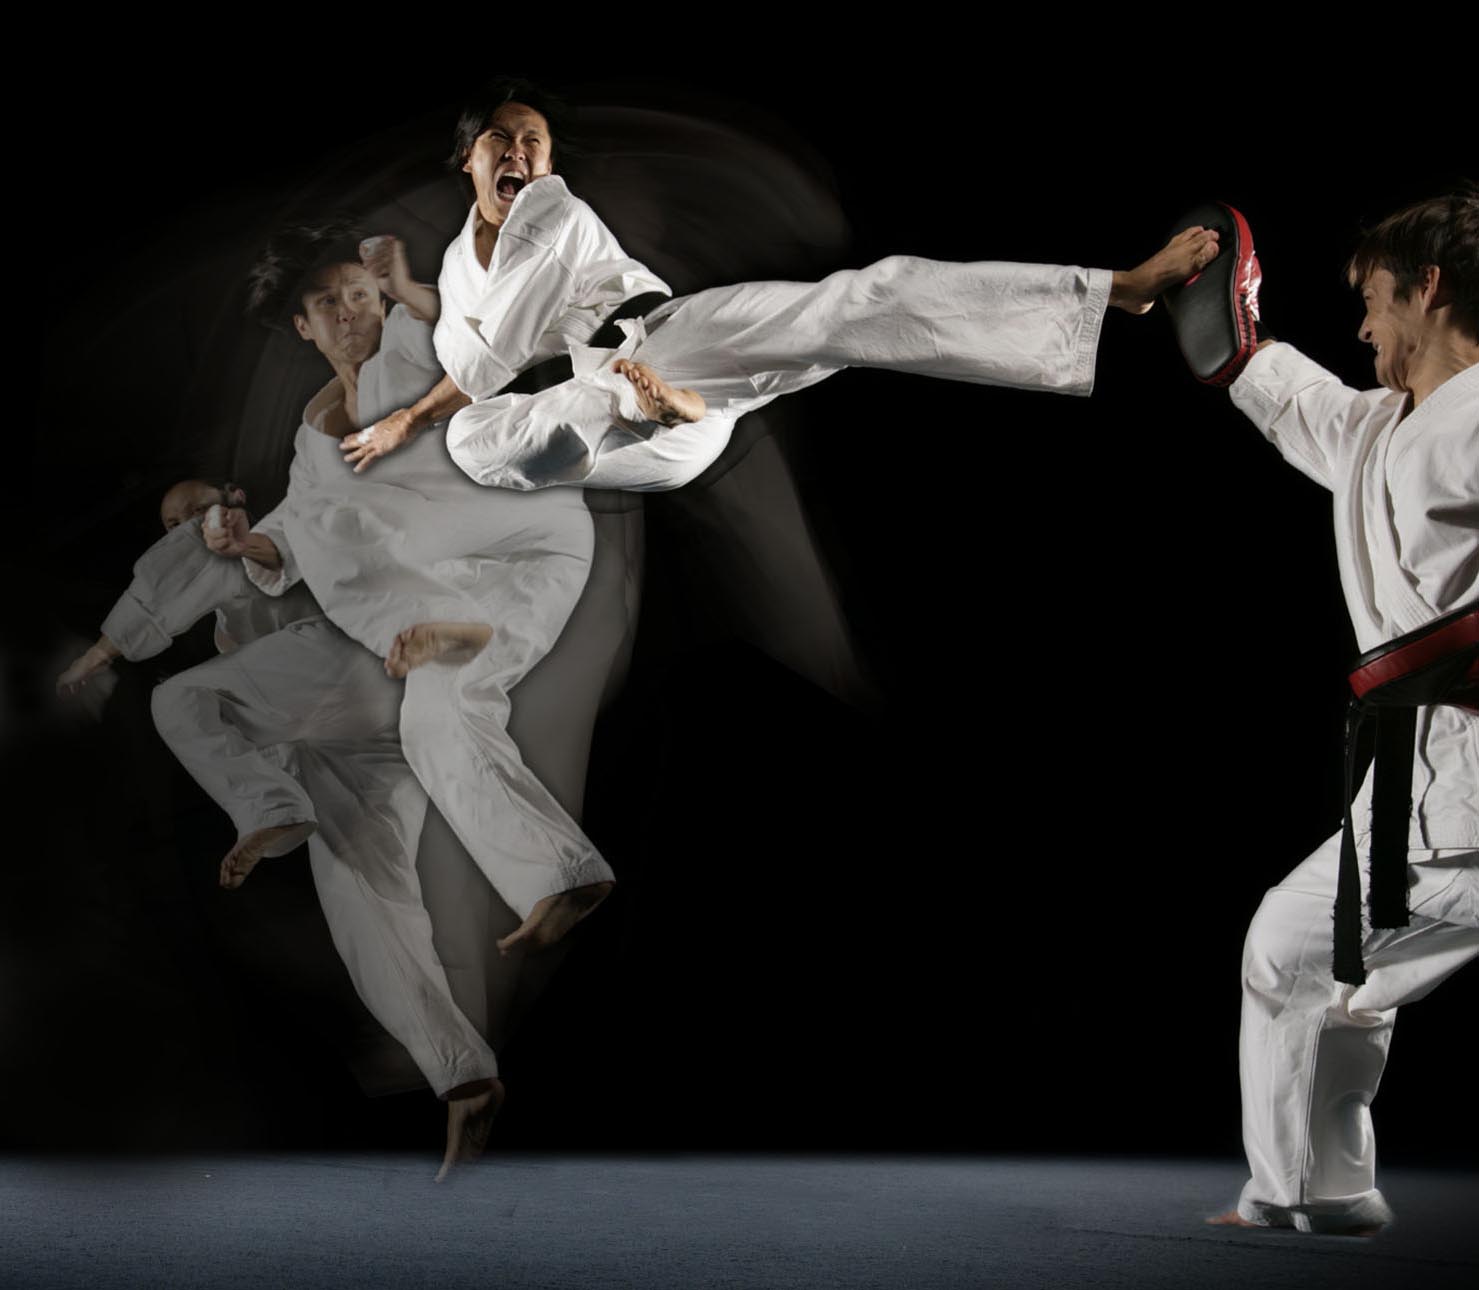 Training for martial arts - Fitness Science